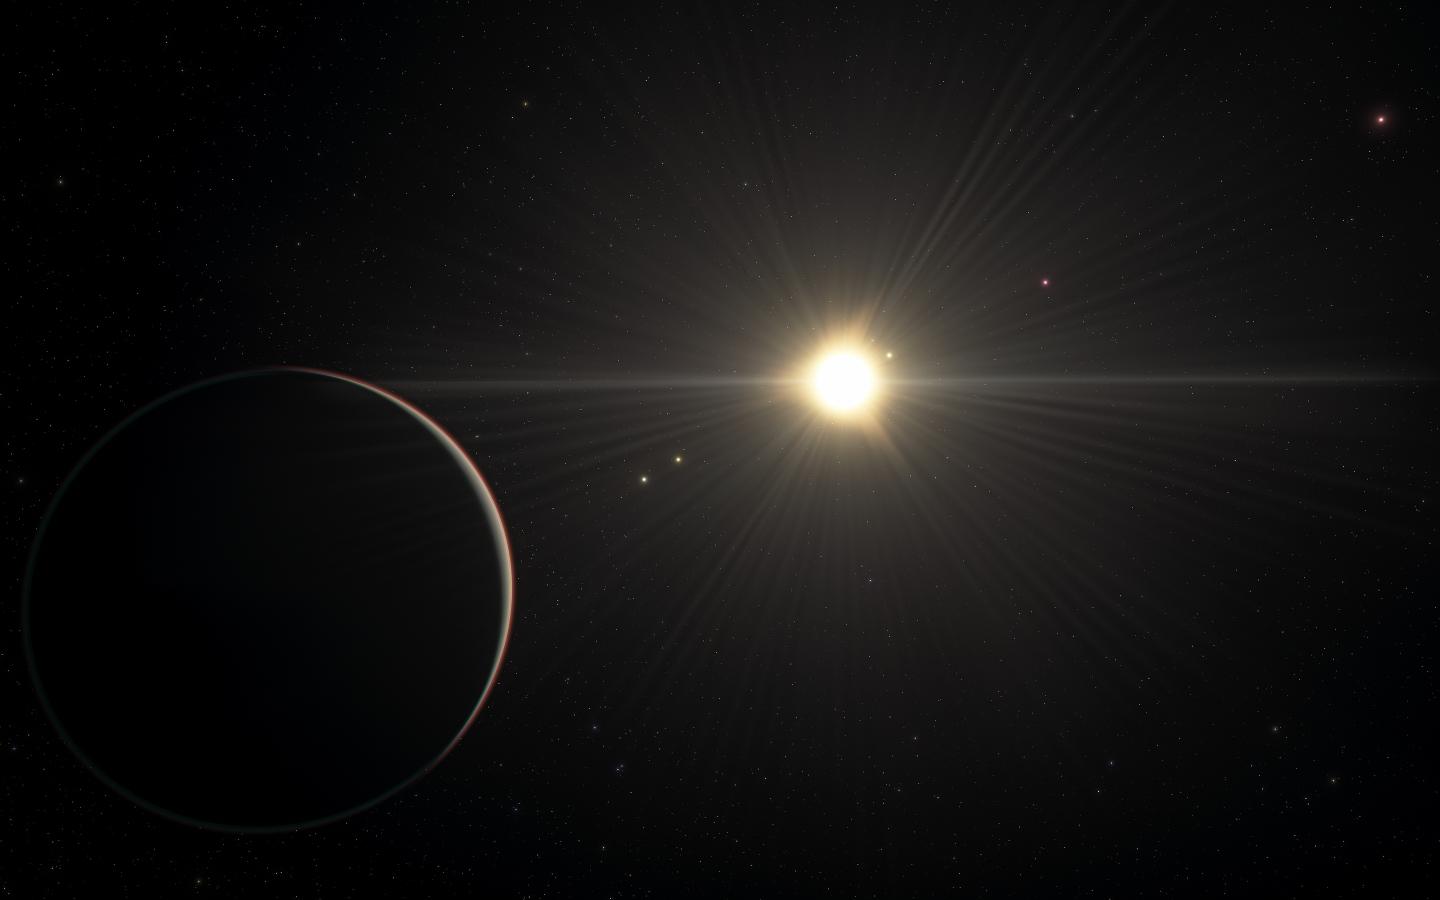 Artist's impression of the TOI-178 system with the planet in the foreground orbiting most distantly around the star.